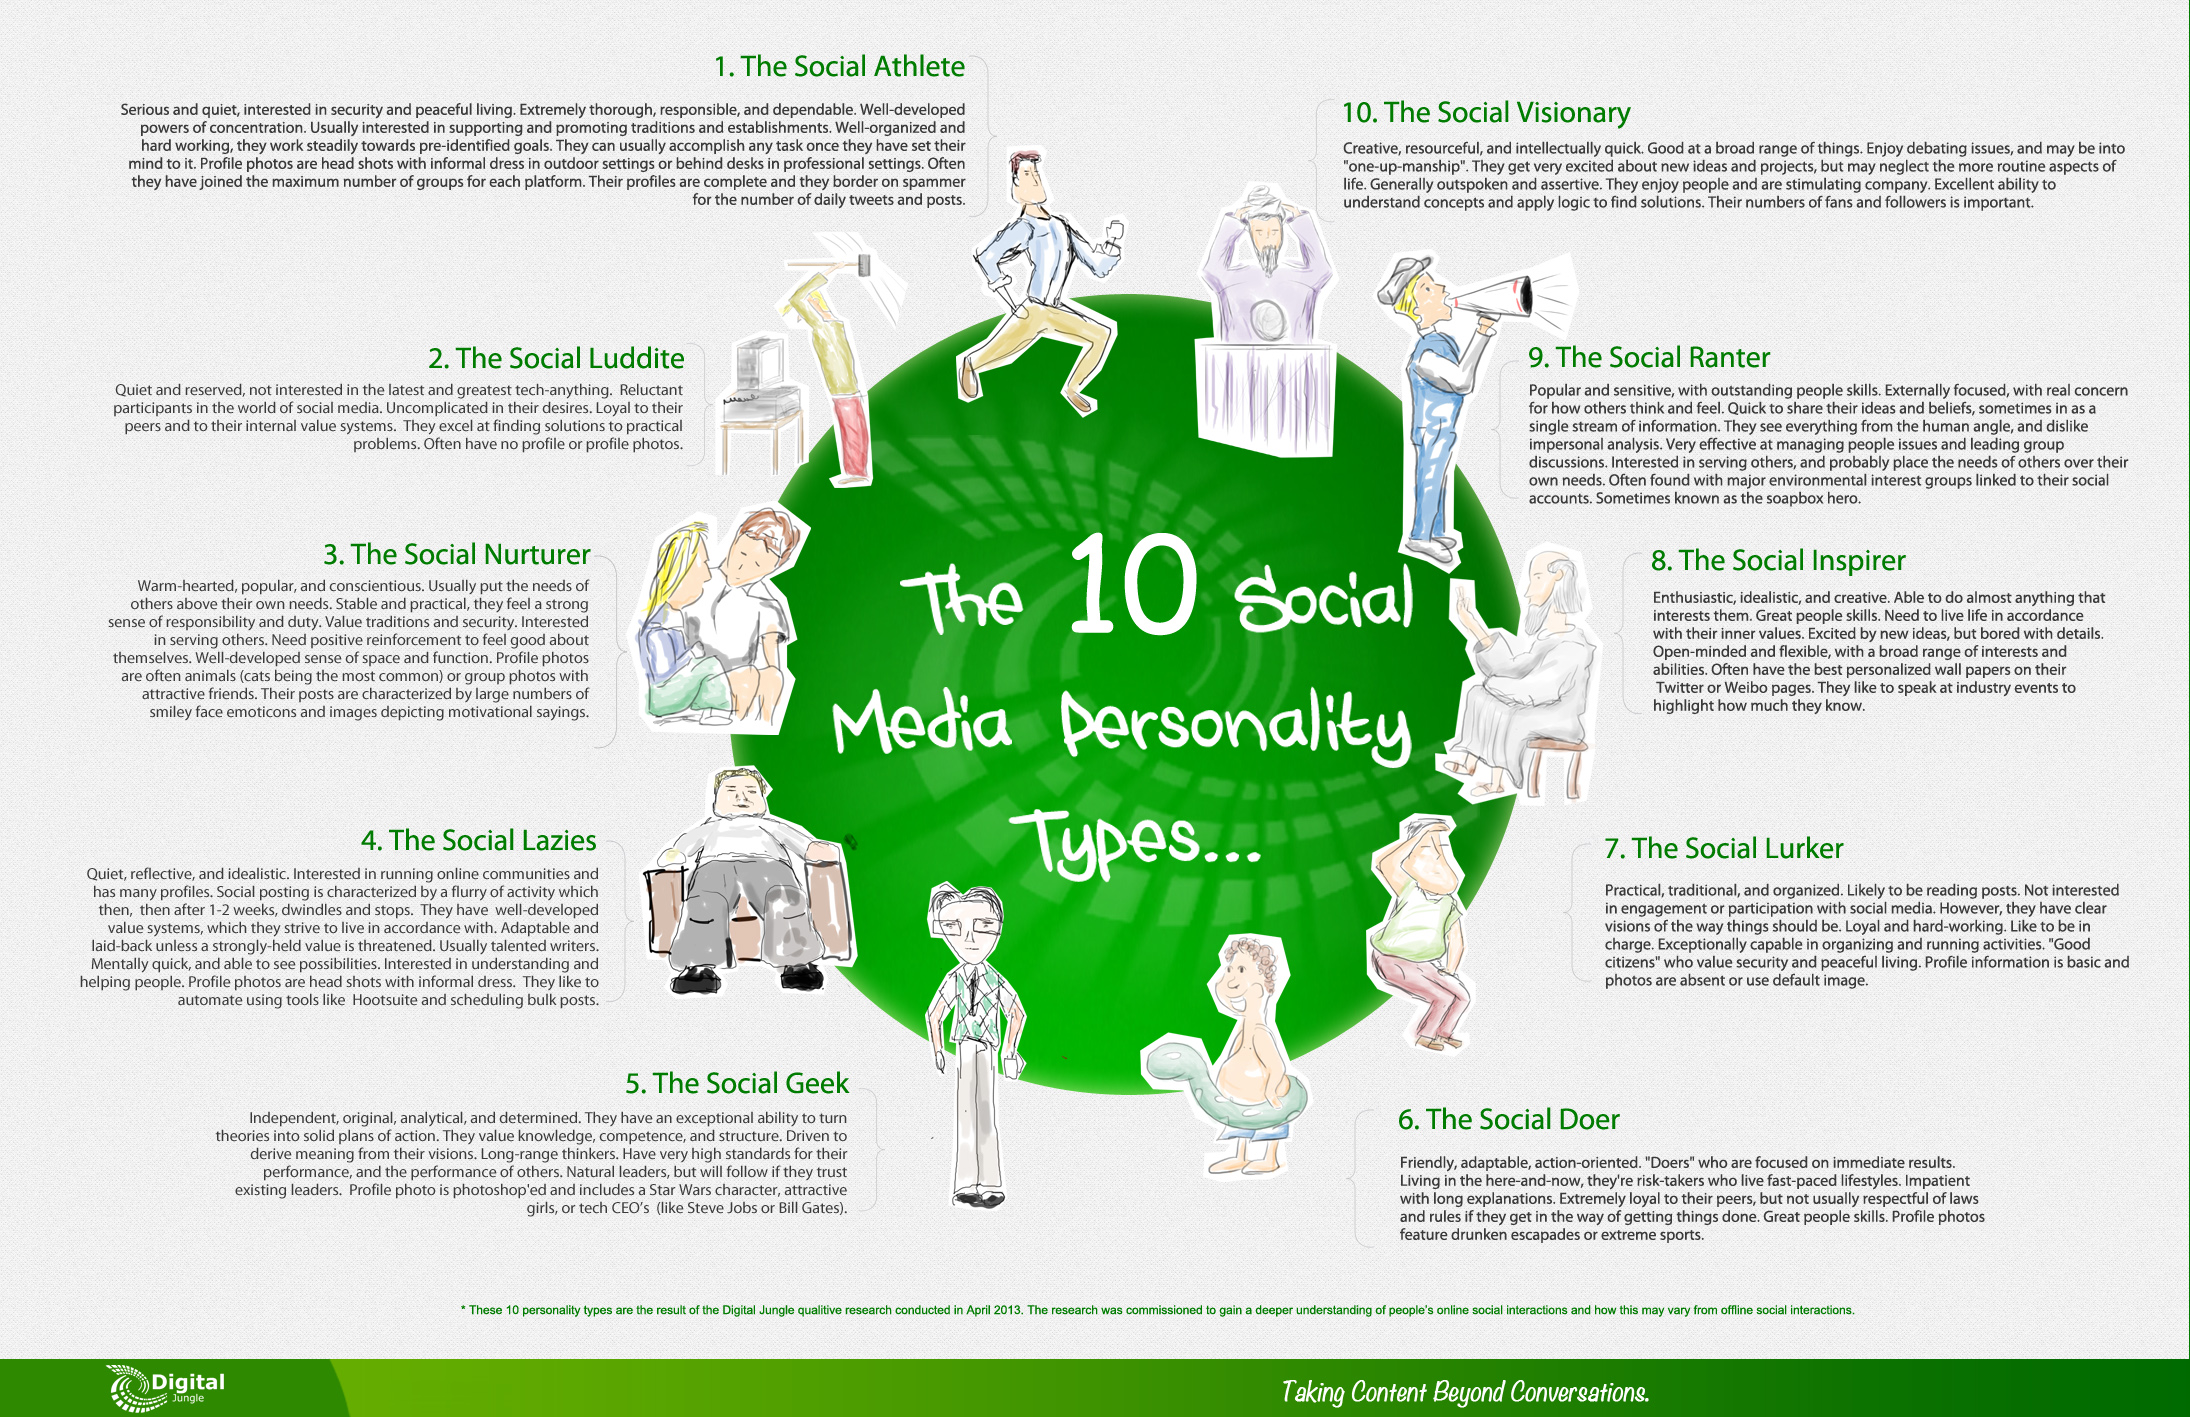 Personality Types and Social Media